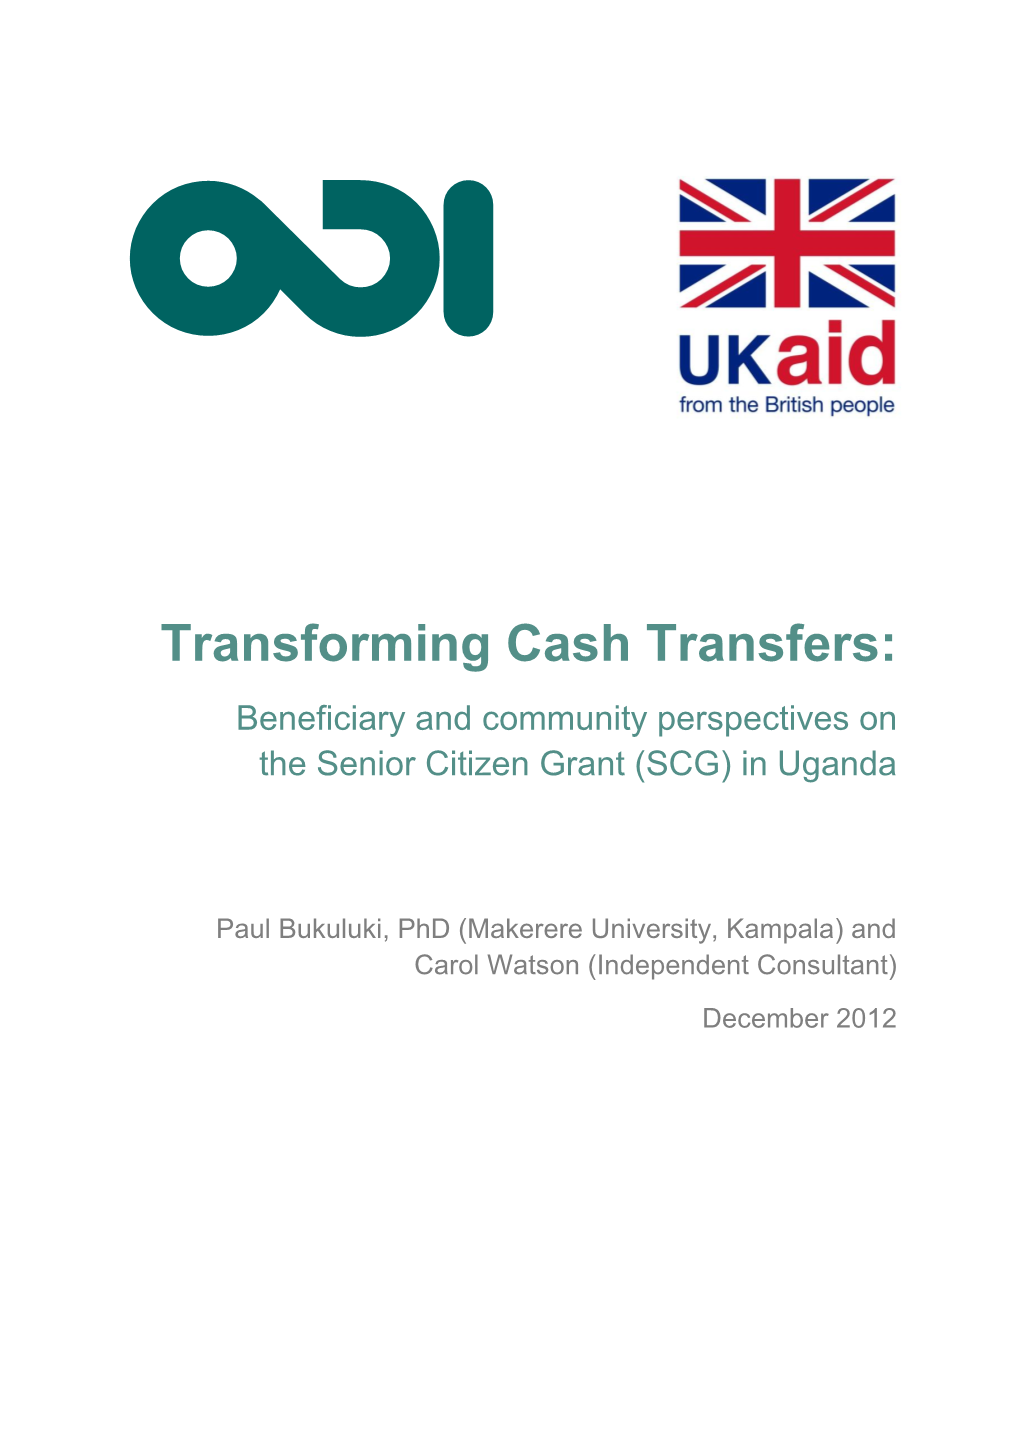 Transforming Cash Transfers: Beneficiary and Community Perspectives on the Senior Citizen Grant (SCG) in Uganda